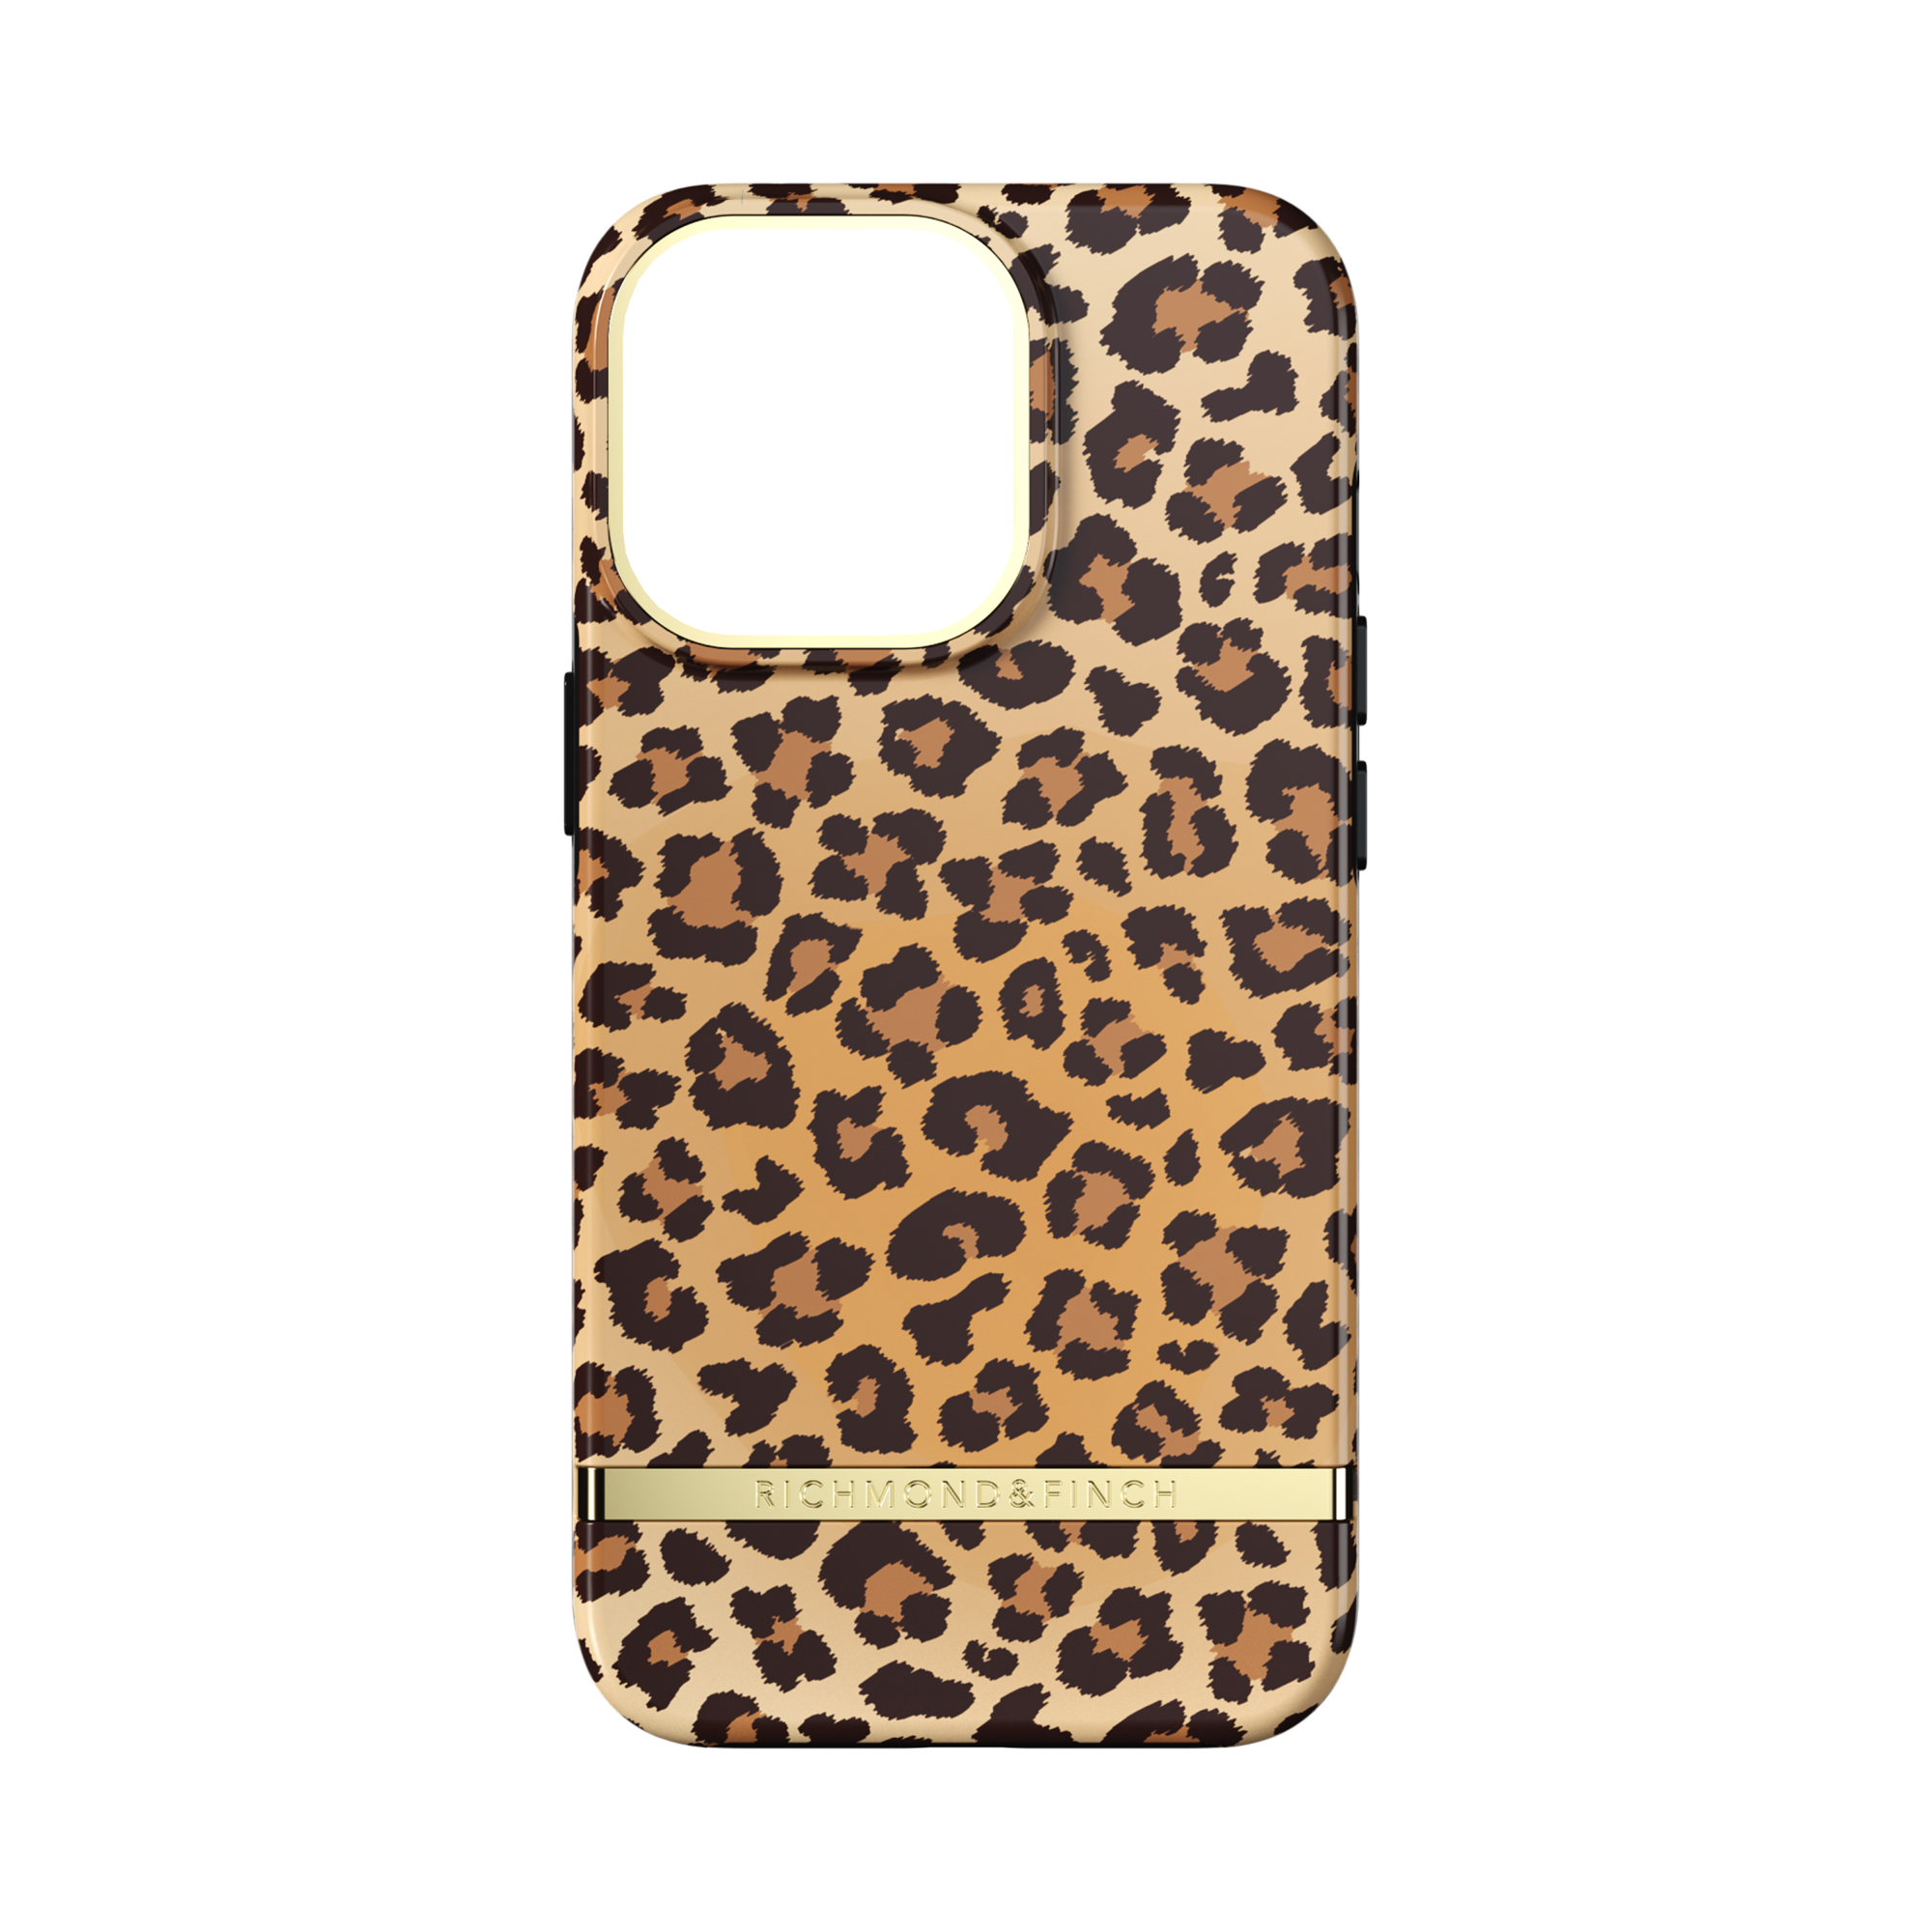 13 13 Leopard YELLOW APPLE, FINCH Pro, Soft RICHMOND & iPhone PRO, Backcover, IPHONE